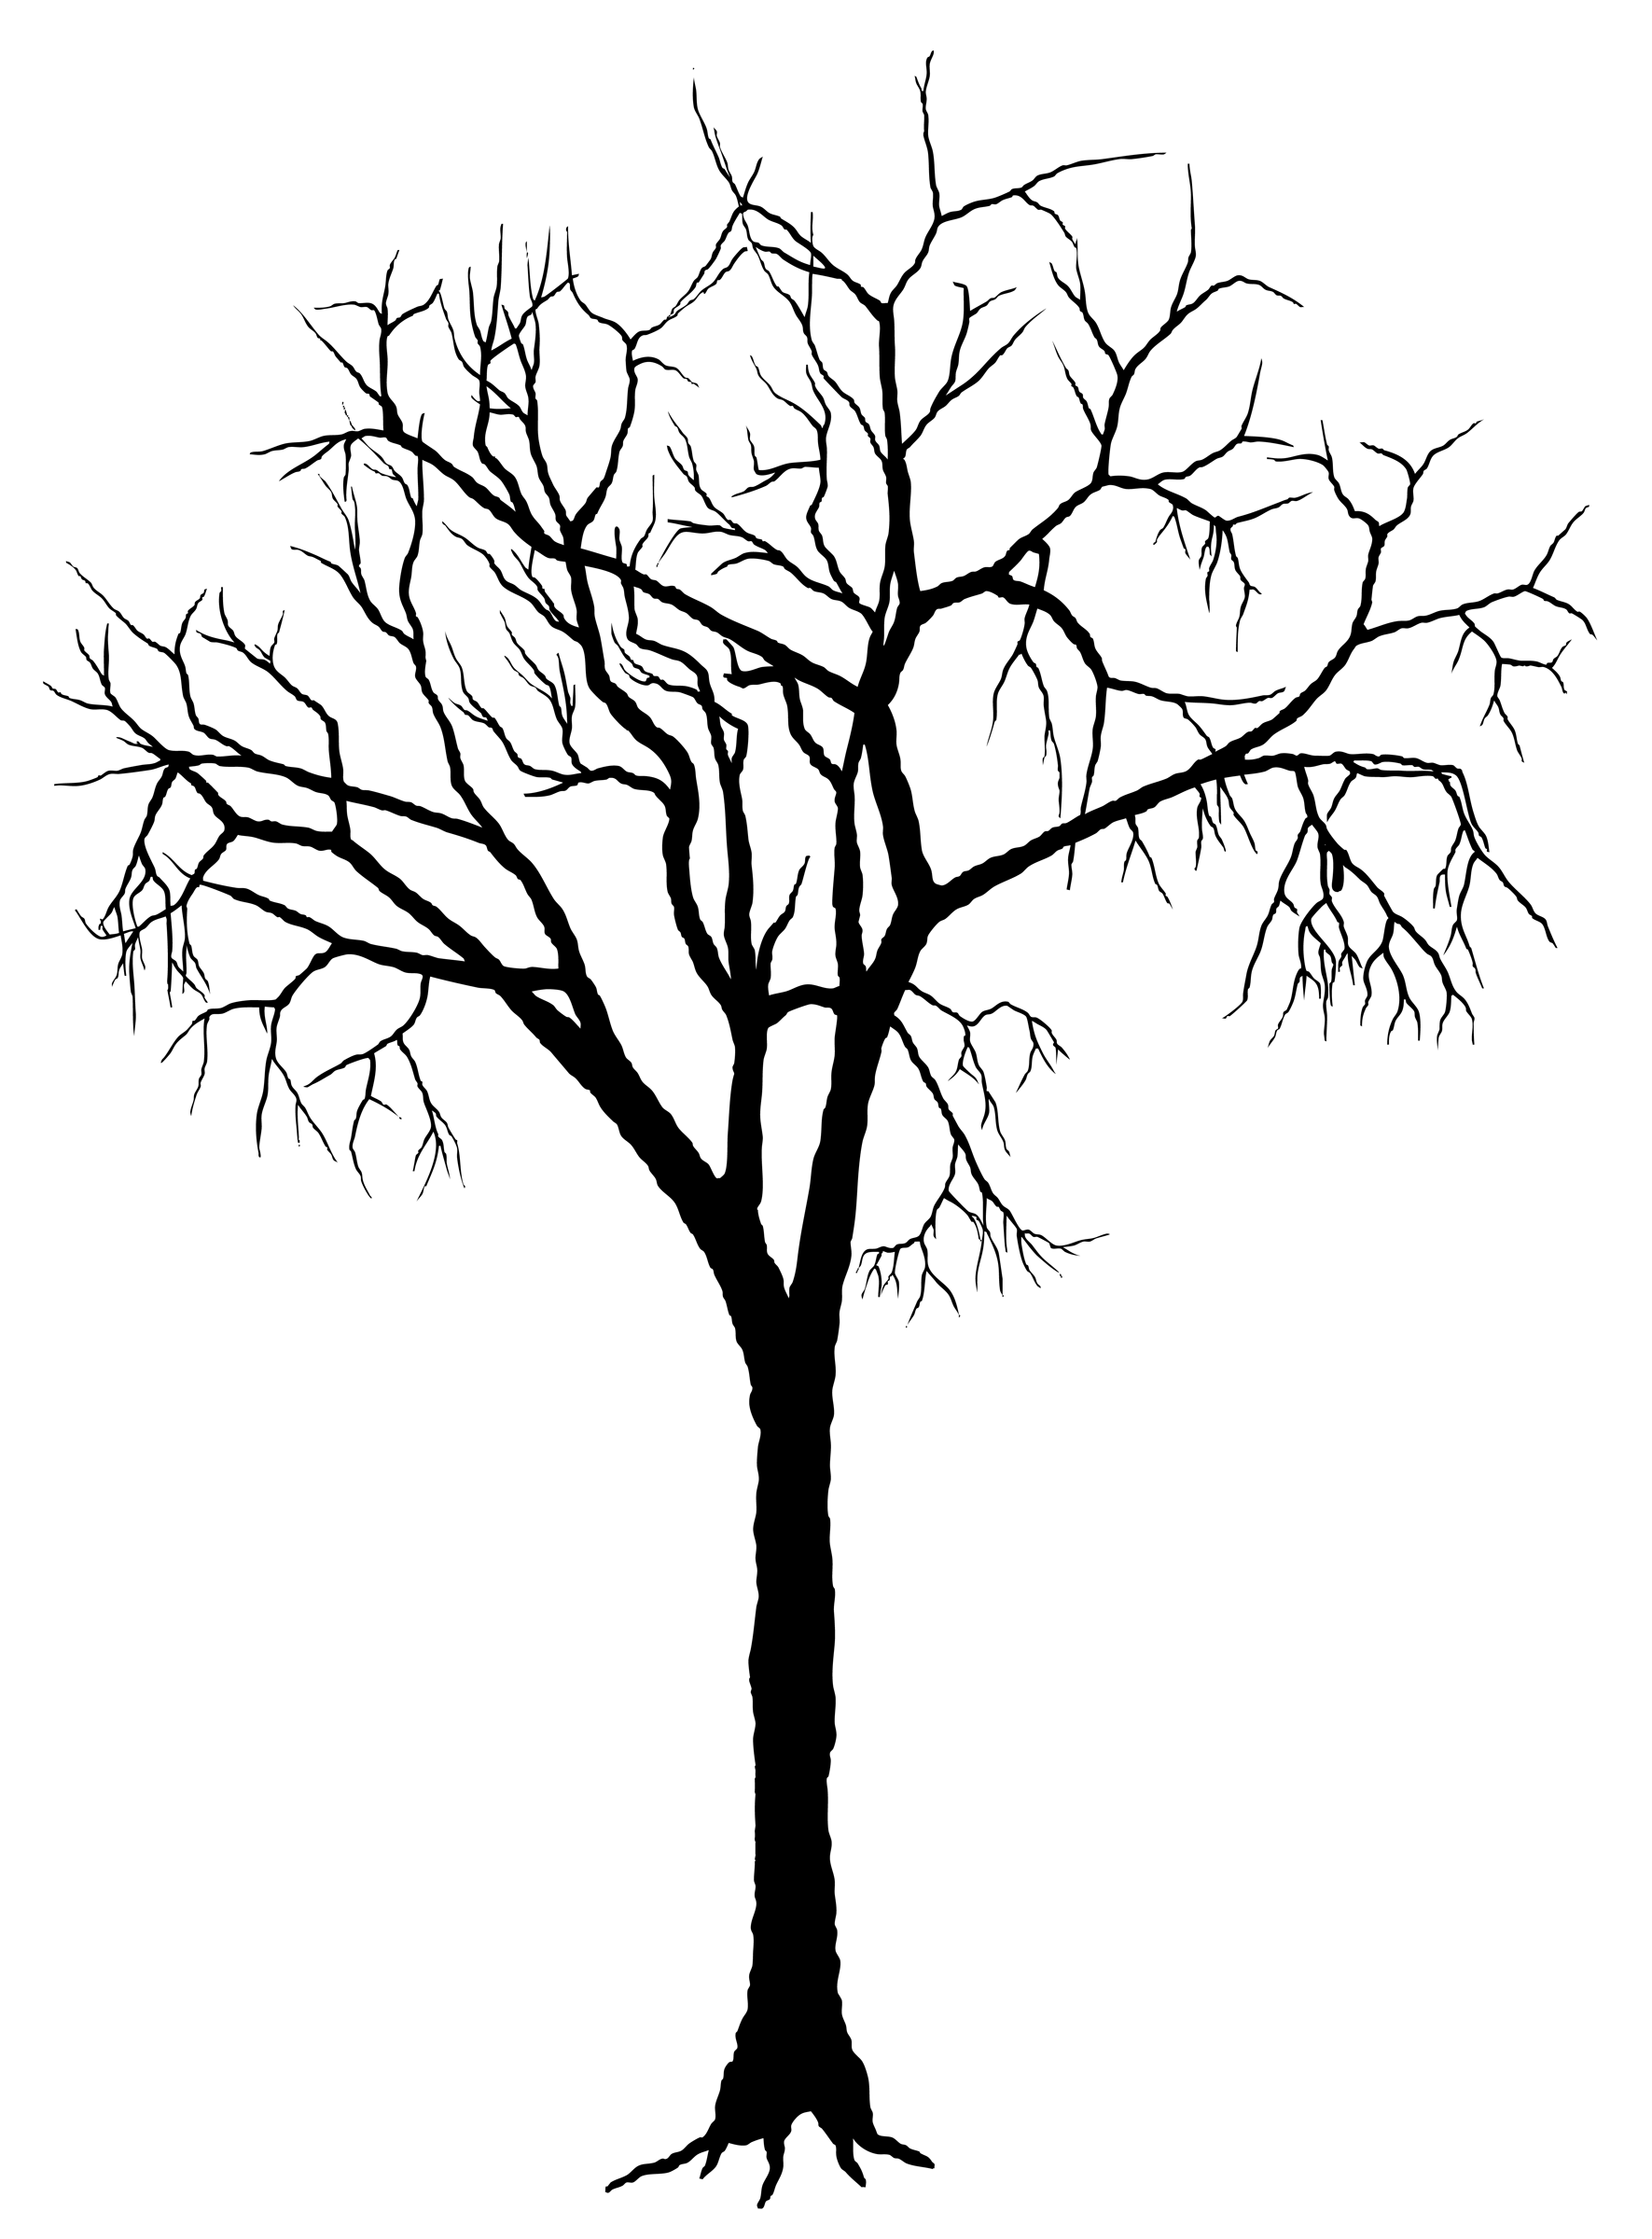 Tree silhouette clipart free